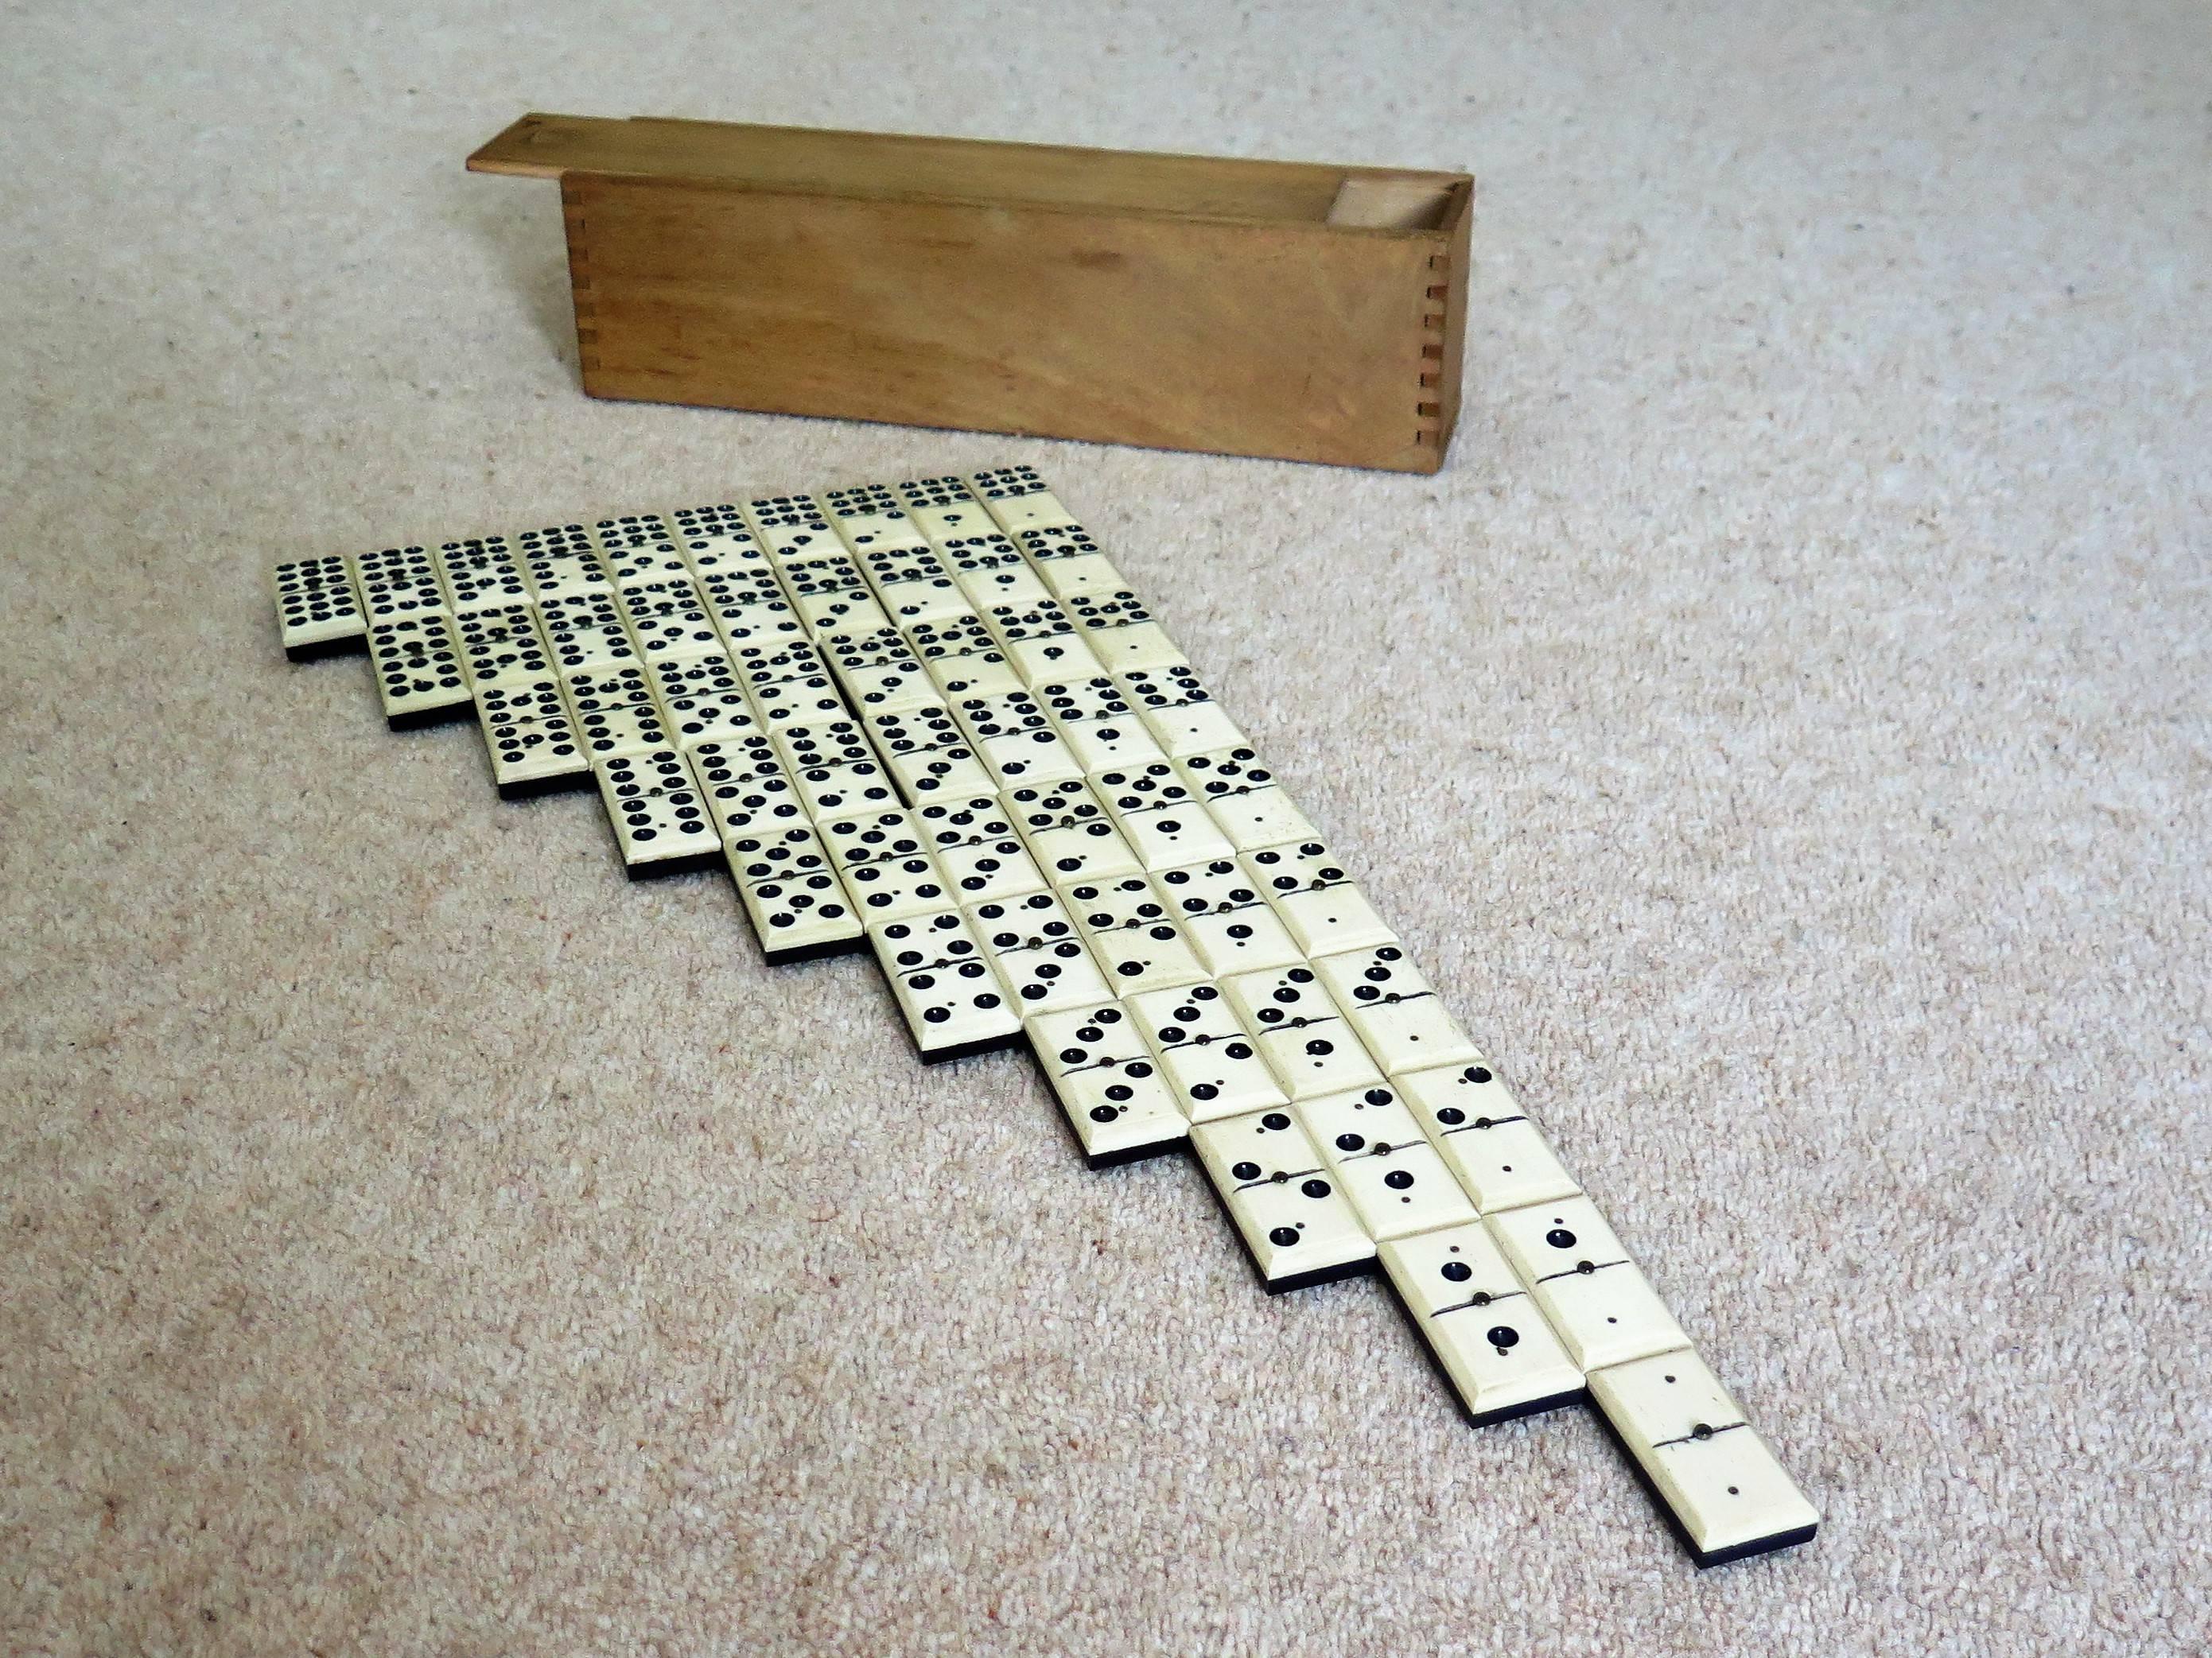 This is a rare and original '9 Spot' Dominoe game of 55 individual dominoes, coming complete with its jointed wooden box or case.

Dominoe sets are normally six-spot sets giving a total of 28 dominoes.
This set is much rarer, having a full